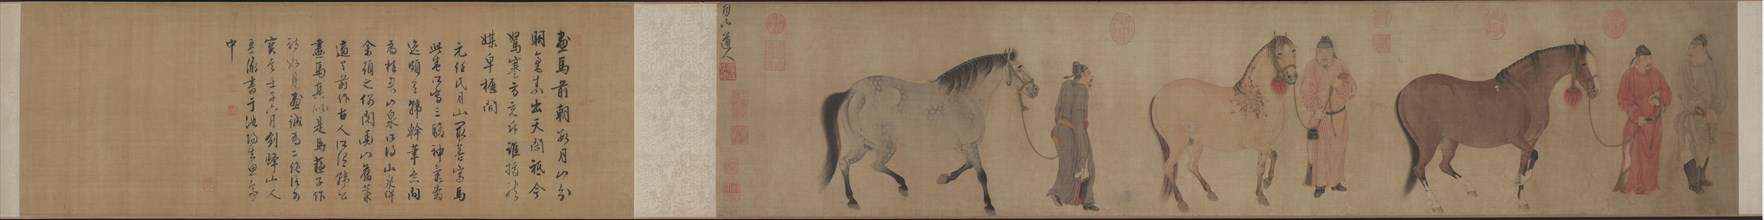 Three Horses and Four Grooms, c. 1320s. Ren Renfa (Chinese, 1254-1328). Handscroll, ink and color